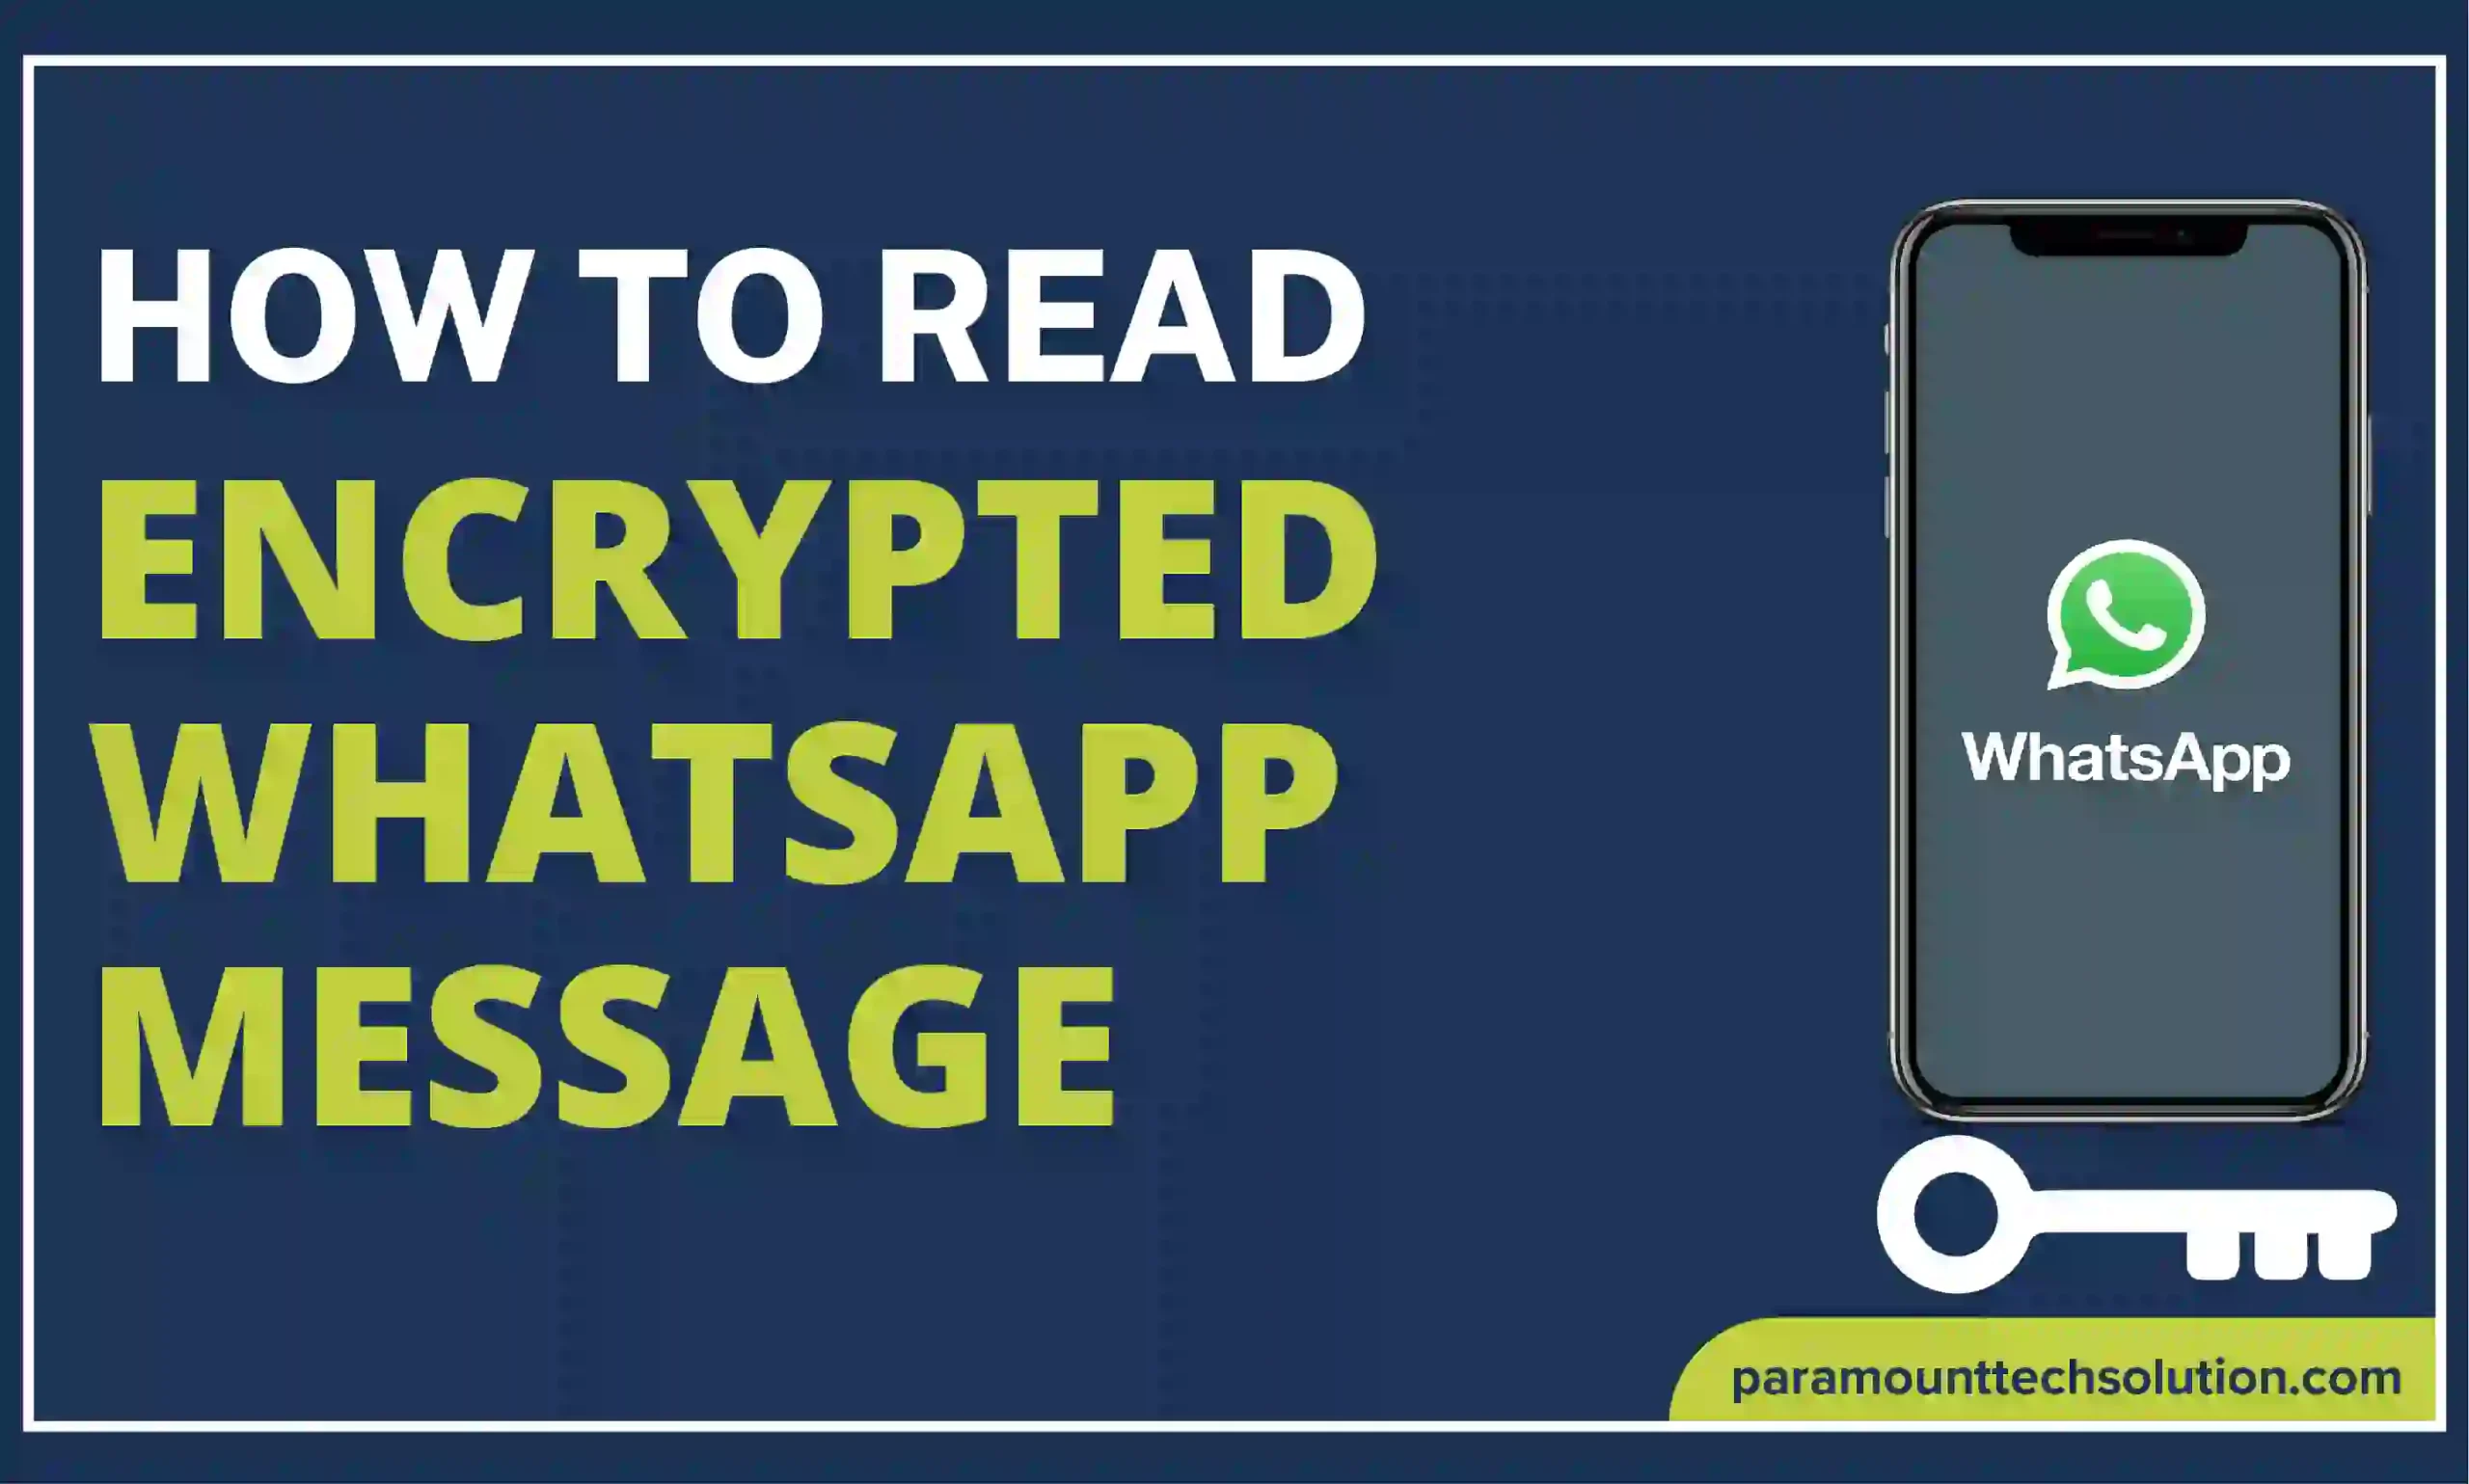 How to Read Encrypted WhatsApp Messages or to read WhatsApp message even after high-end security